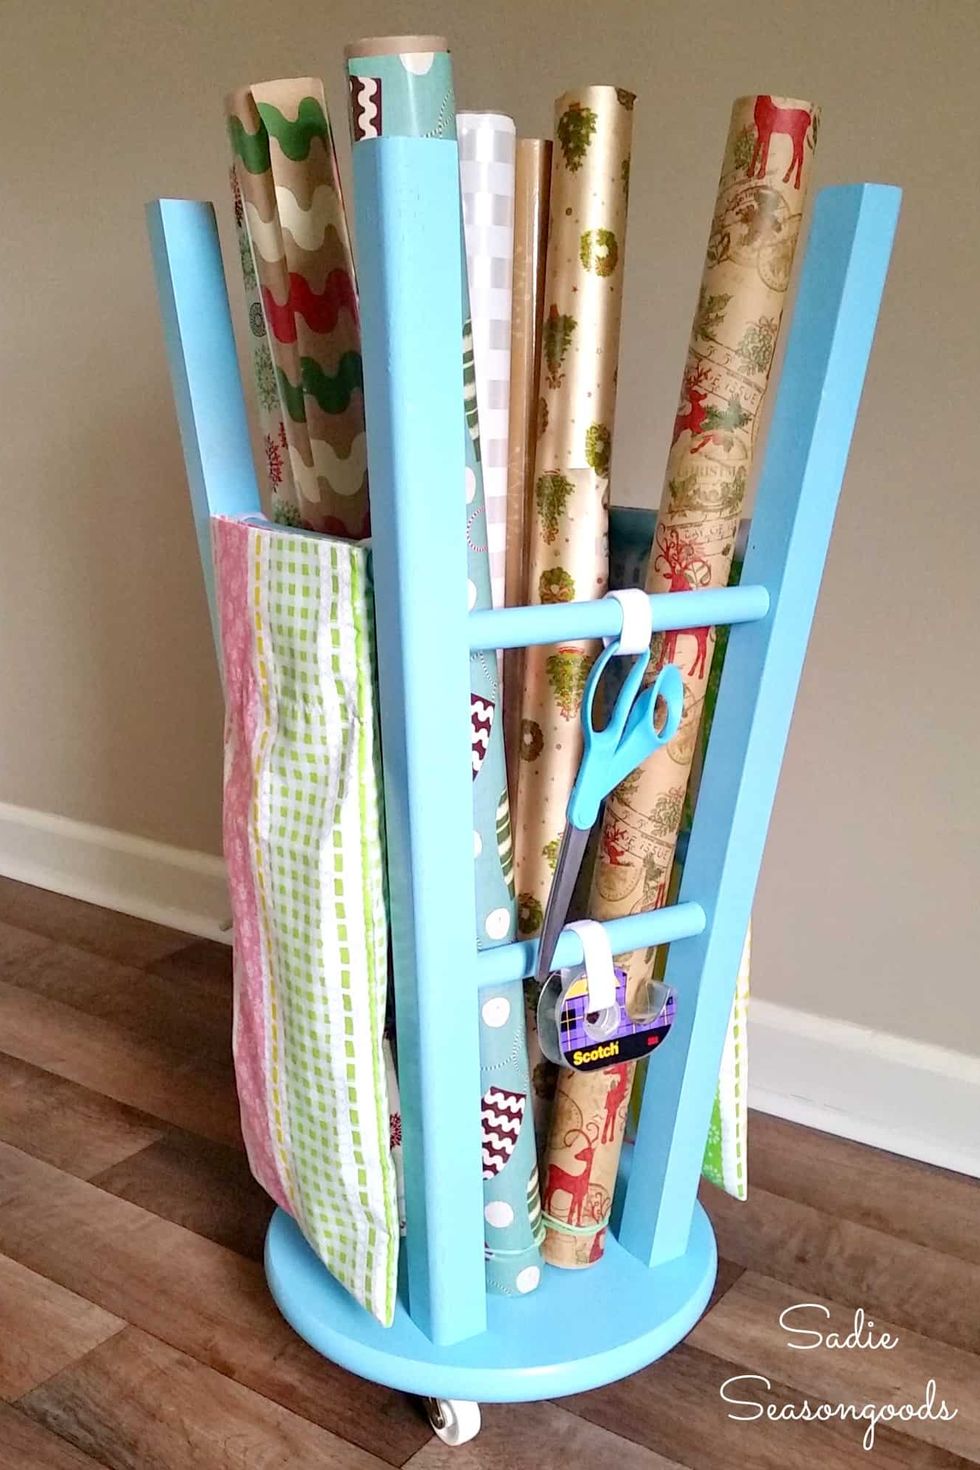 Once You Own a Wrapping Paper Organizer, You Won't Know How You